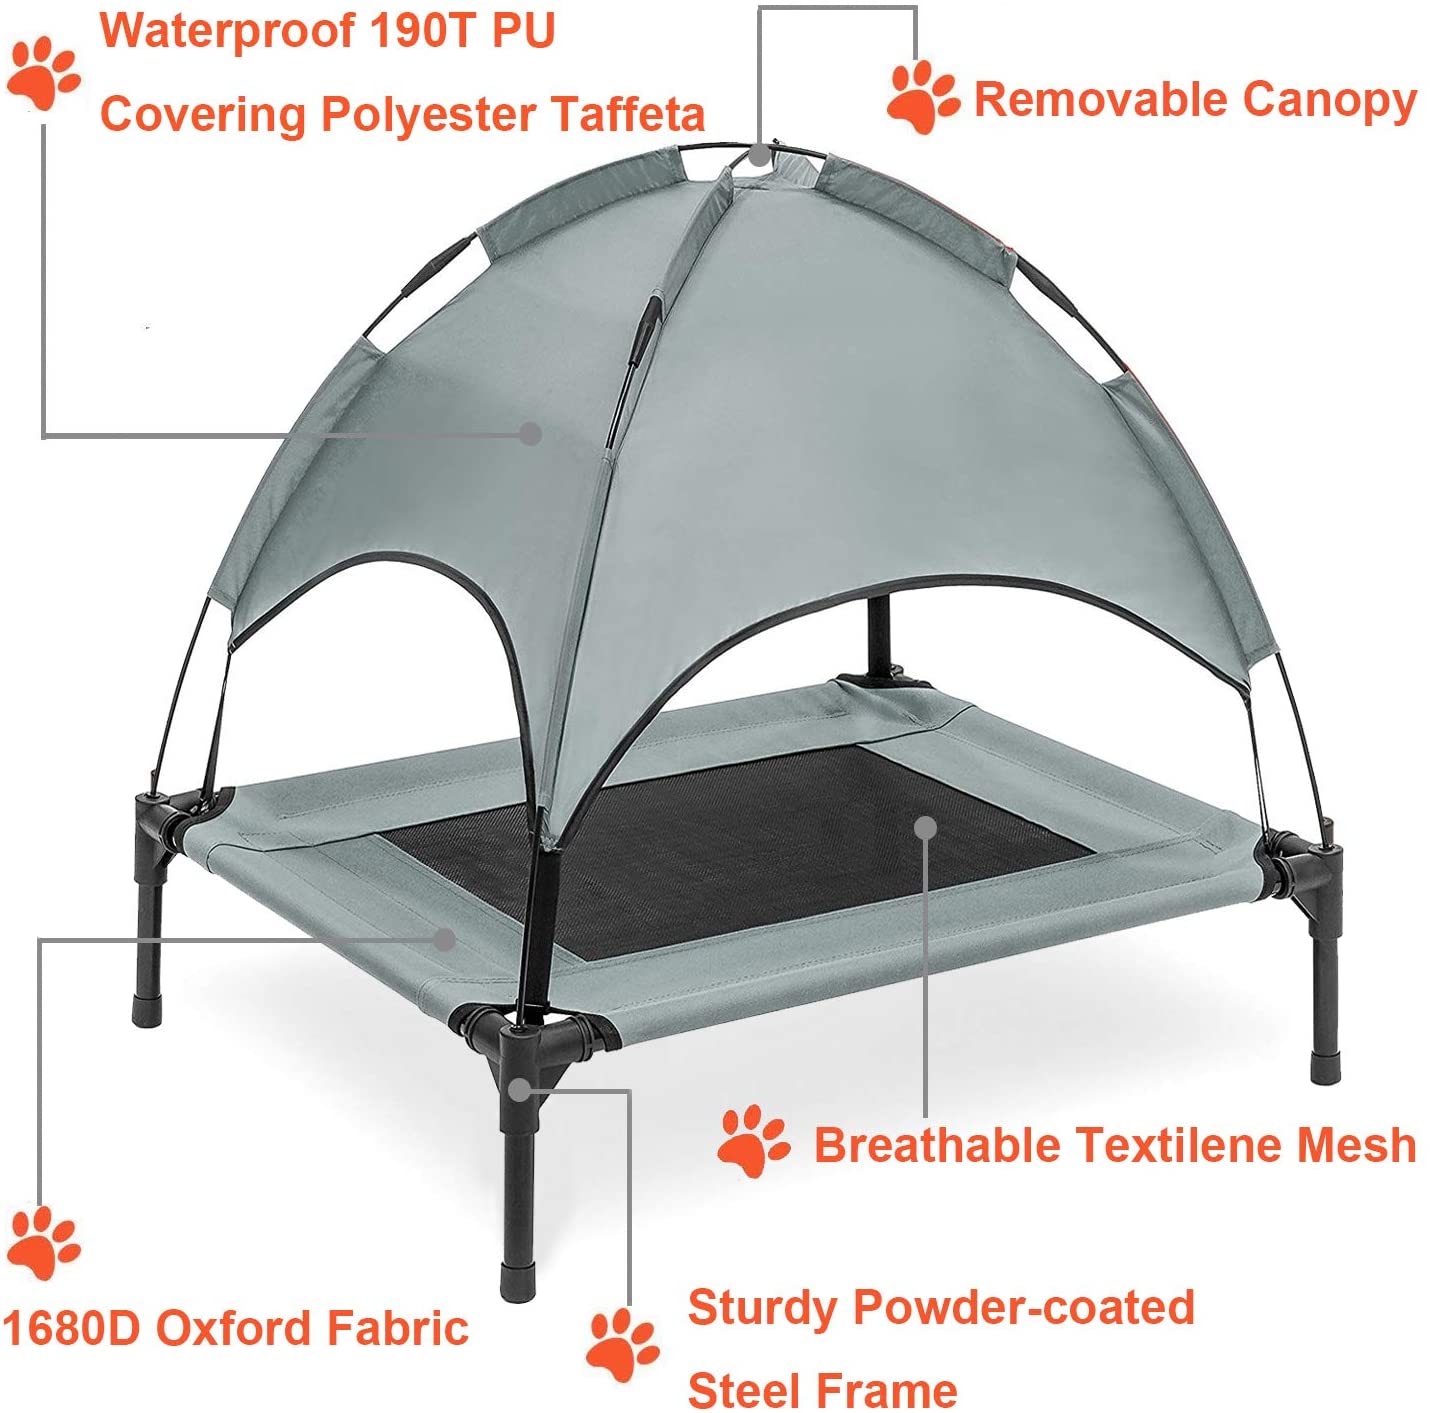 pet bed, pet supply. bed, tent, canopy, assembly, convenient, portable, comfortable, shade, large, medium, grey, mat, dog, cat, animal